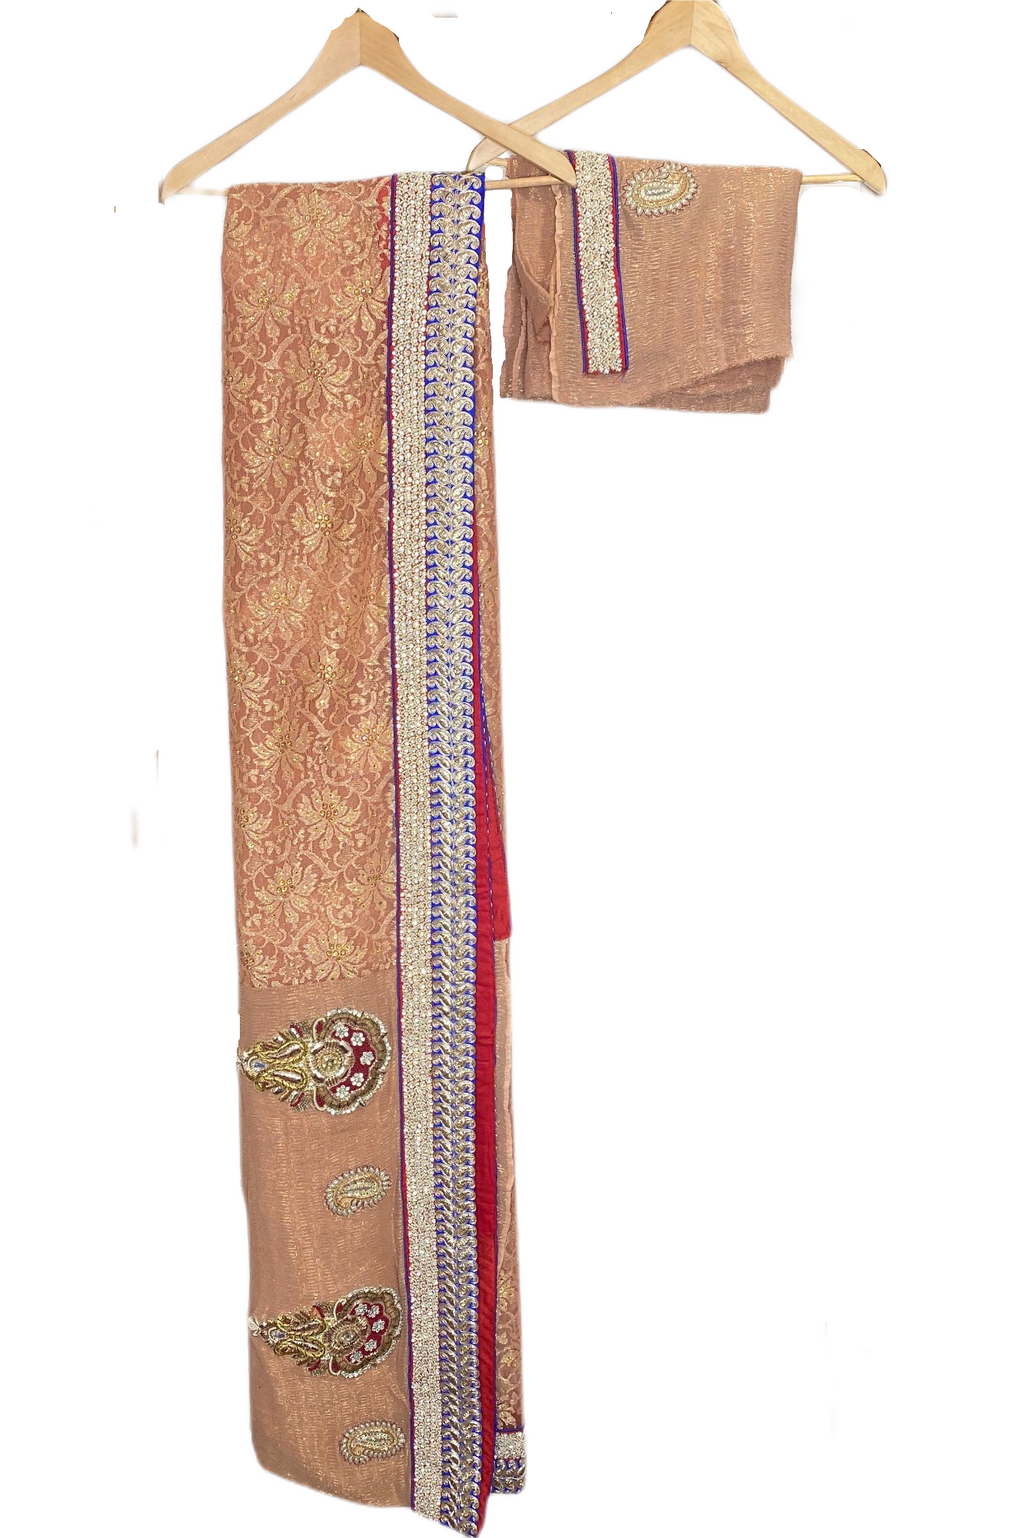 Saree: Gold & Stone Bute with Pearl & Stone Border. Shimmer Lace Pallu with Gold Stones Material: Shimmer Crushed Georgette Saree, Lace Pallu Colour: Peach